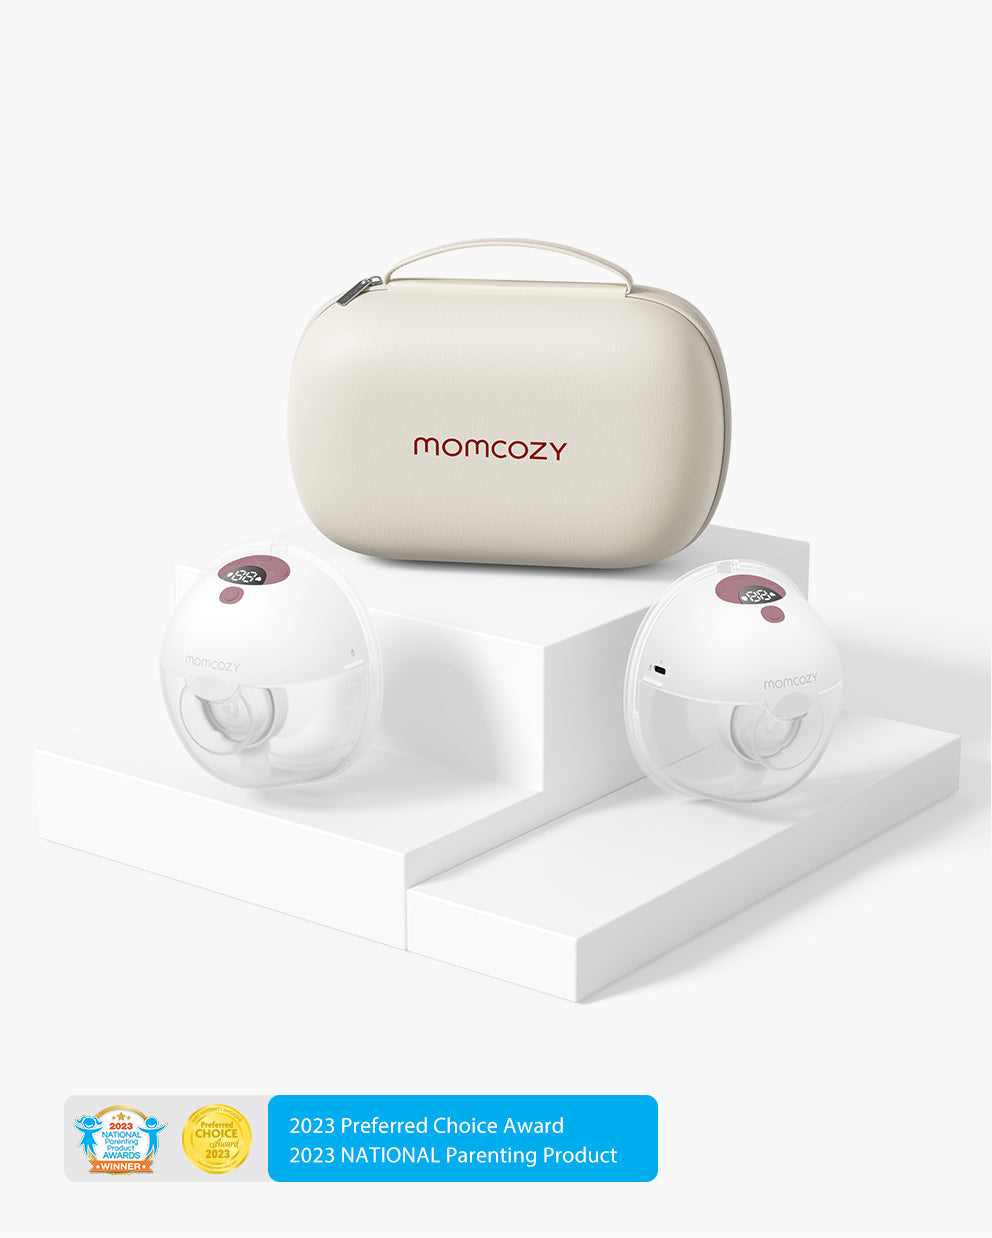 Momcozy S12 Pro Breast Pump Review, Tips, And Troubleshooting